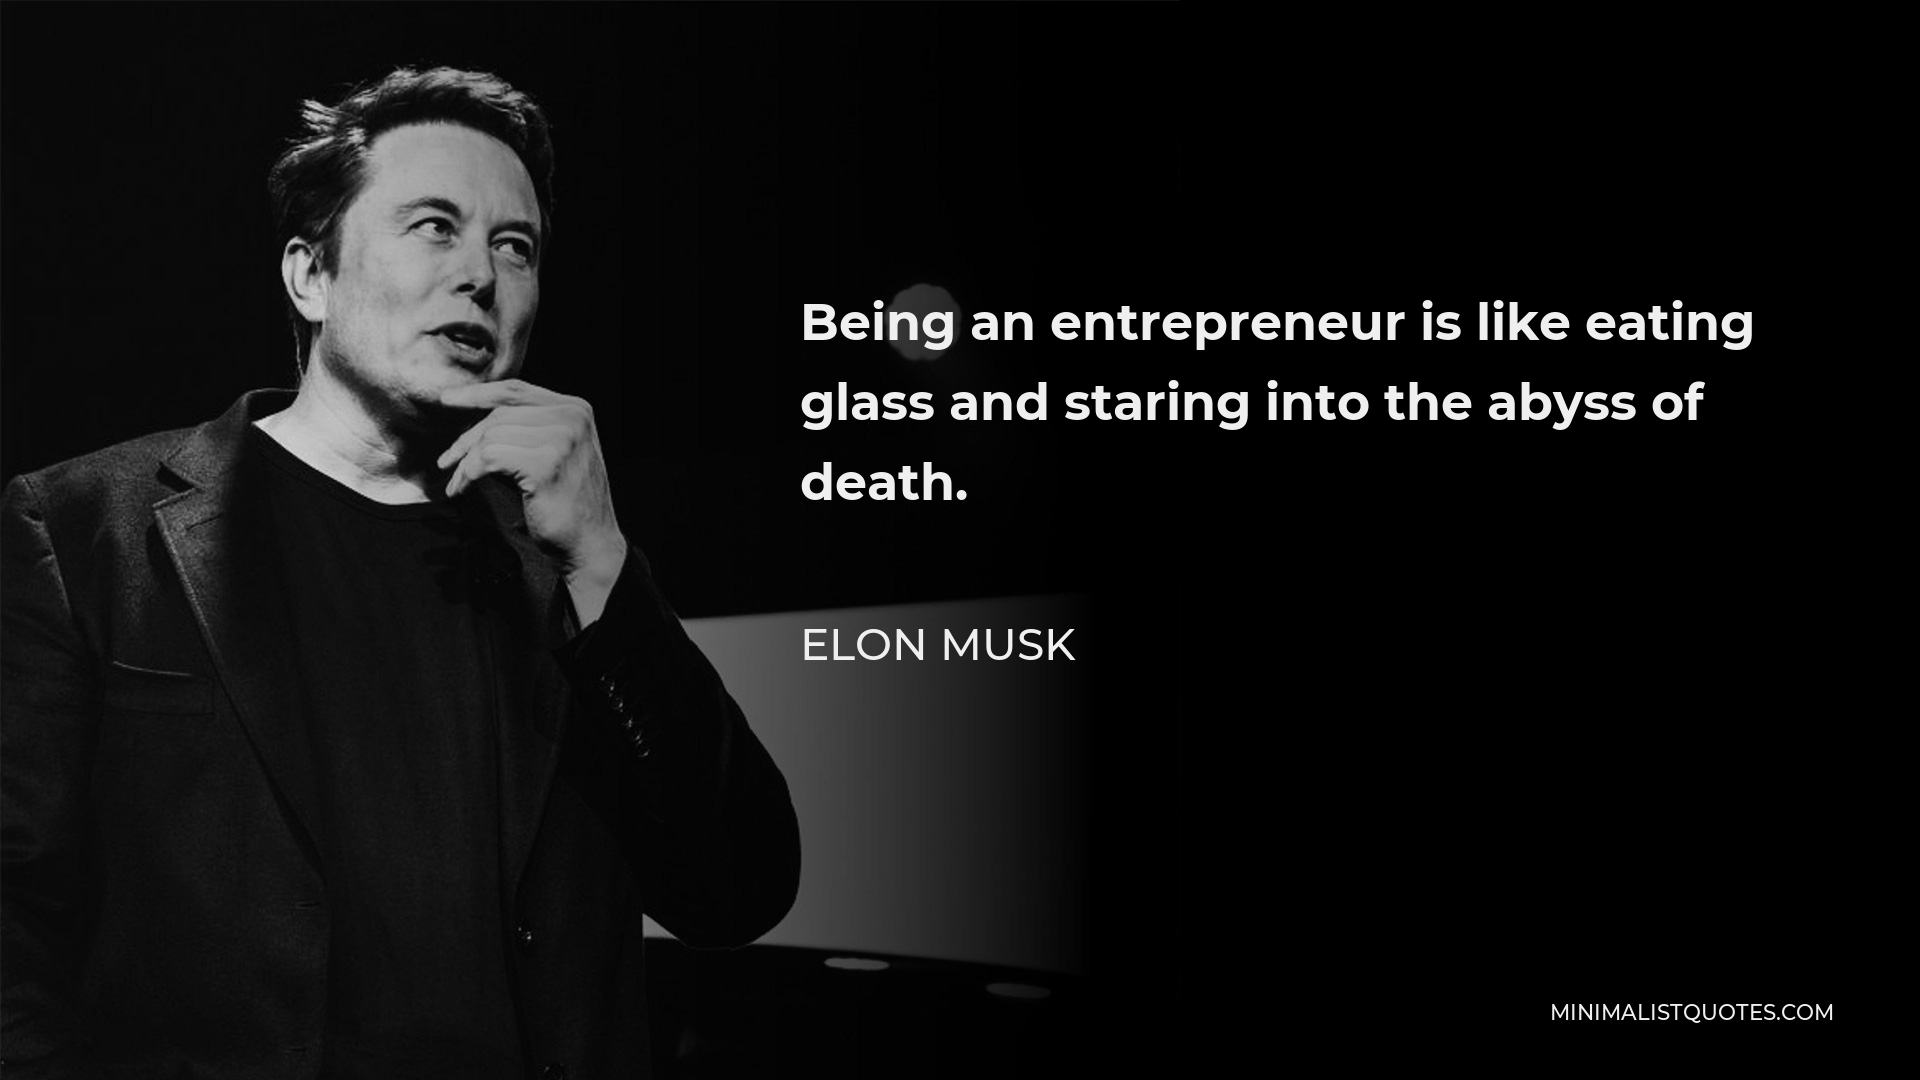 Elon Musk Quote - Being an entrepreneur is like eating glass and staring into the abyss of death.